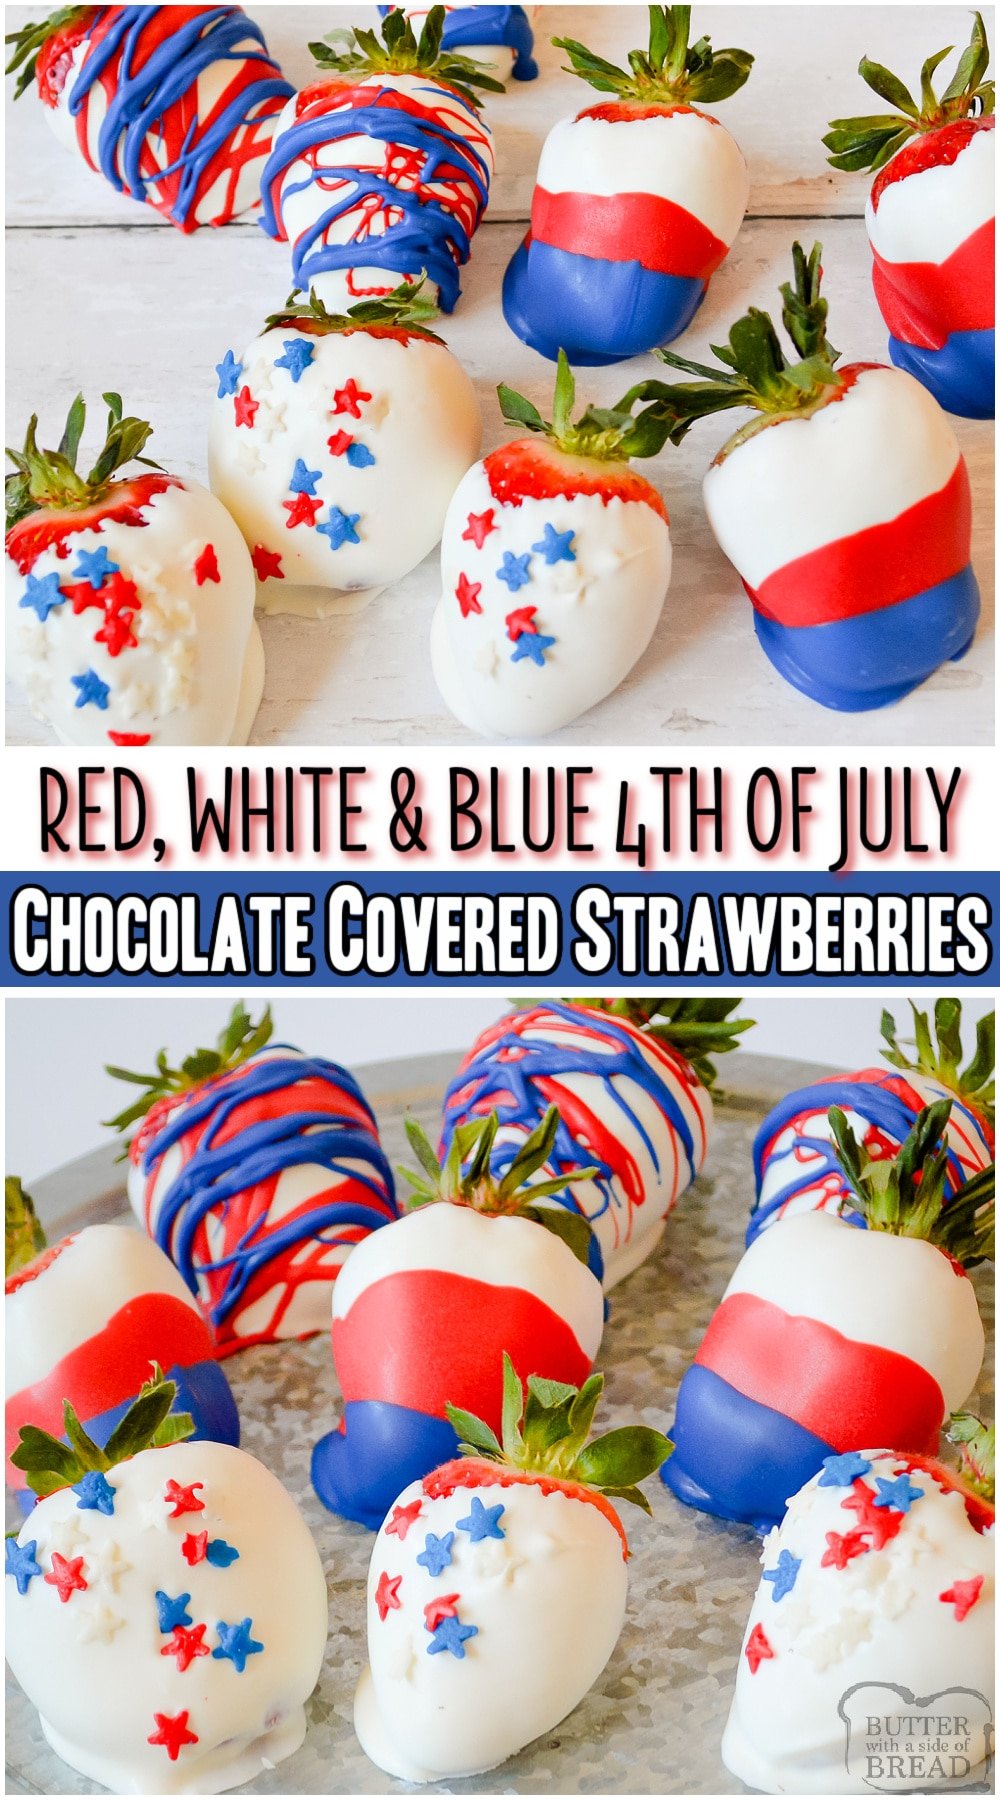 4TH OF JULY CHOCOLATE COVERED STRAWBERRIES are a fun patriotic dessert that's both festive & delicious! Fresh berries covered in red, white & blue chocolate and sprinkles. Simple instructions for how to make chocolate dipped strawberries included! #strawberries #4thofJuly #redwhiteblue #dessert #nobake #easyrecipe from BUTTER WITH A SIDE OF BREAD